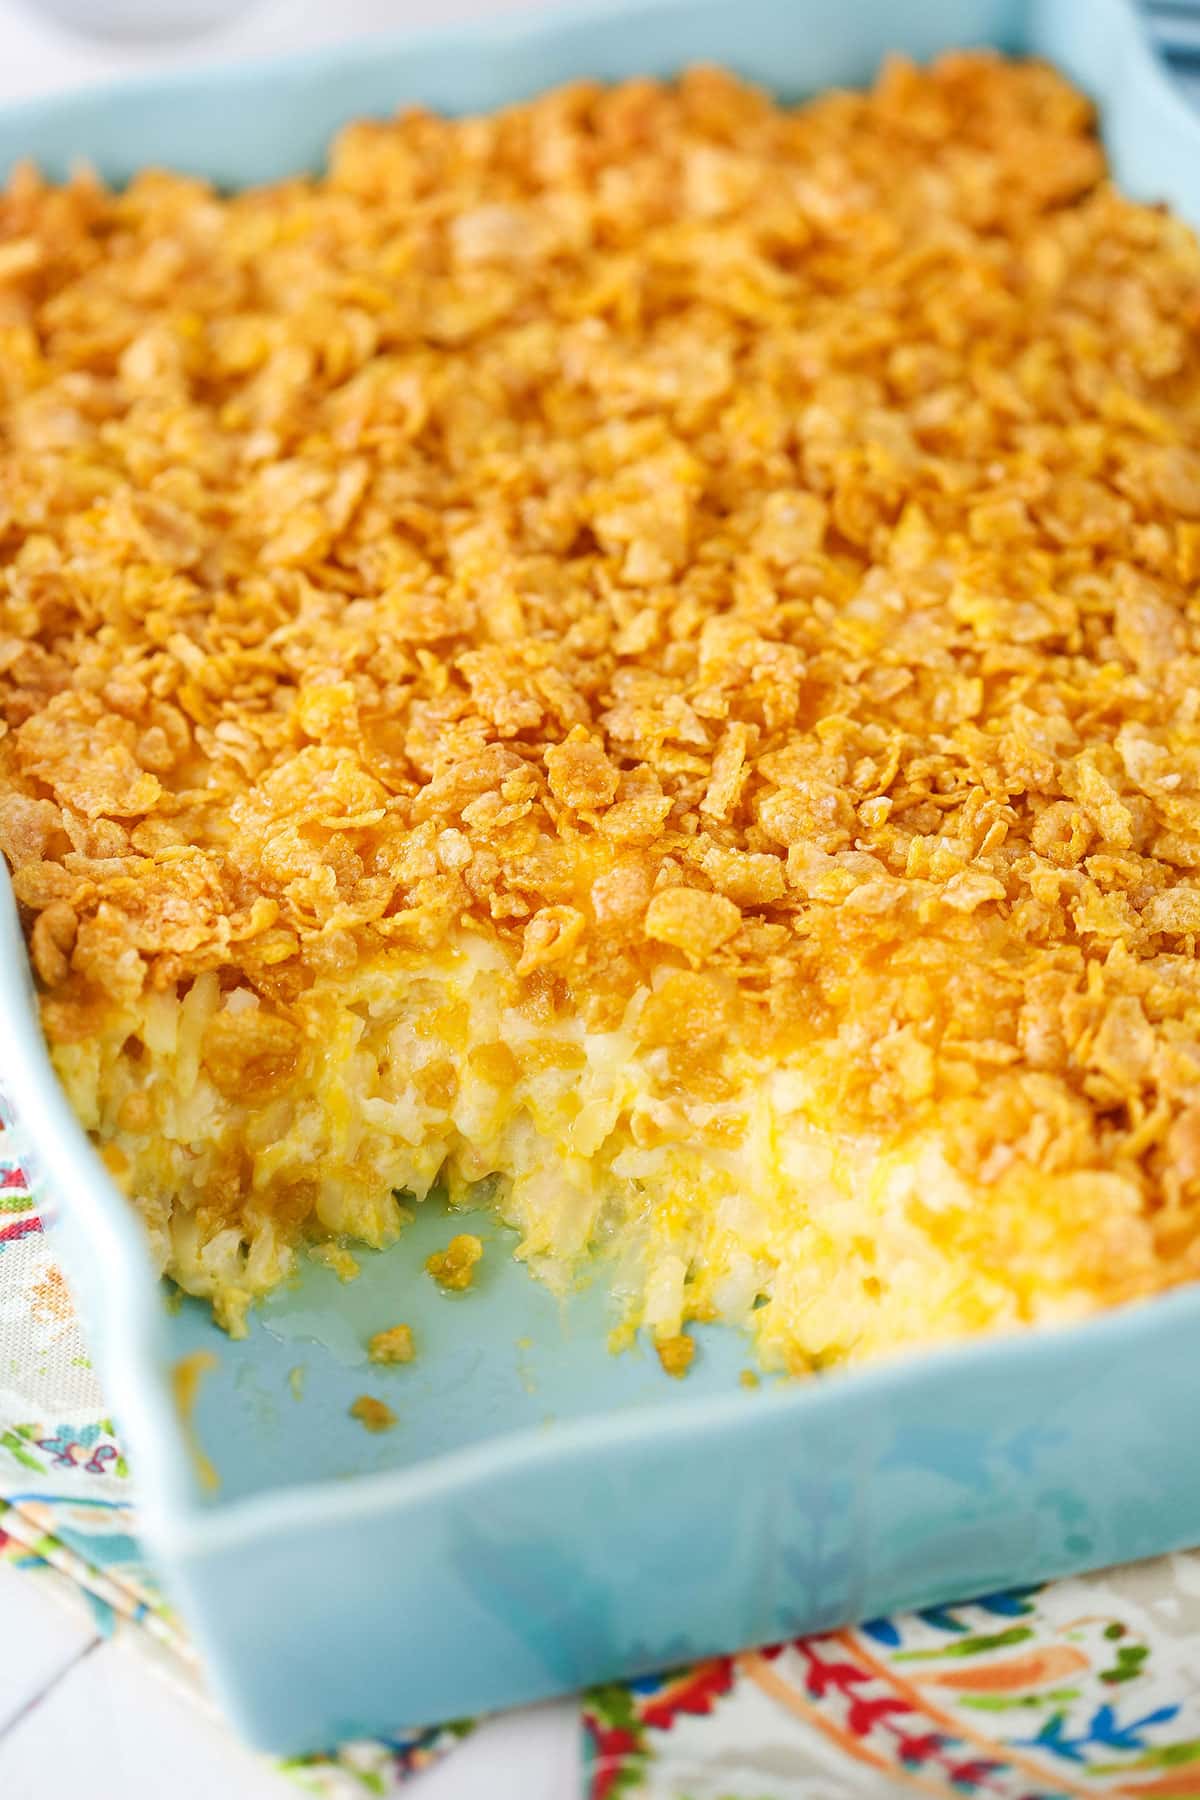 Hashbrown casserole made with sour cream and cheddar cheese.